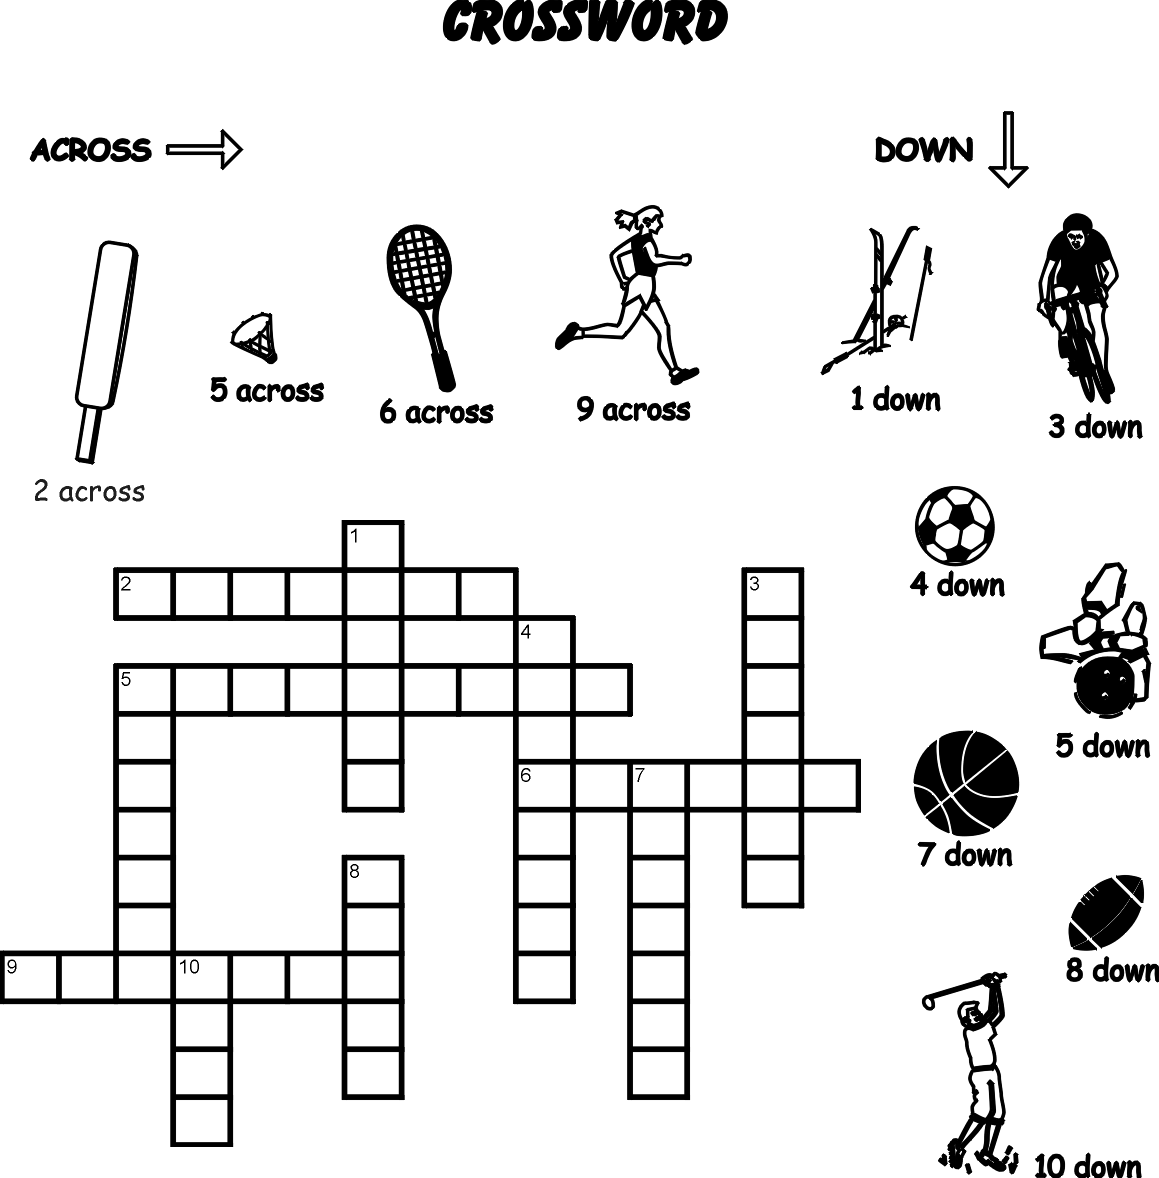 14-sports-crossword-puzzles-kitty-baby-love